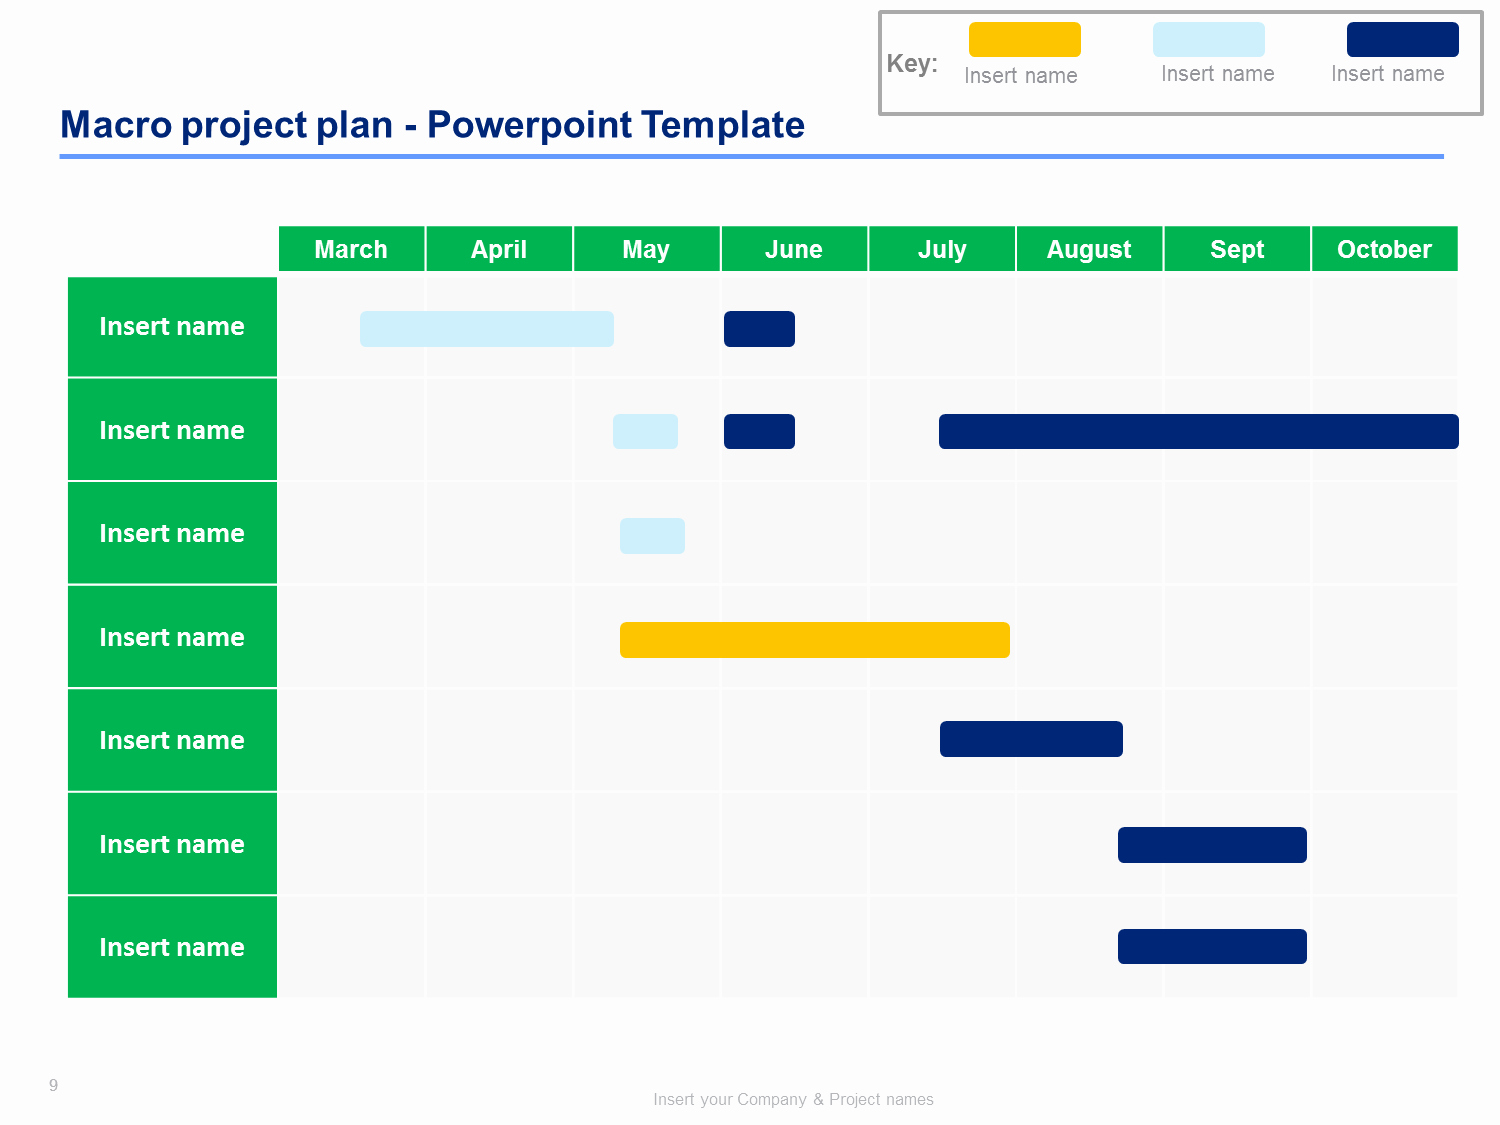 Project Plan Powerpoint Template New Download now 10 Project Plan Templates &amp; Project Timeline